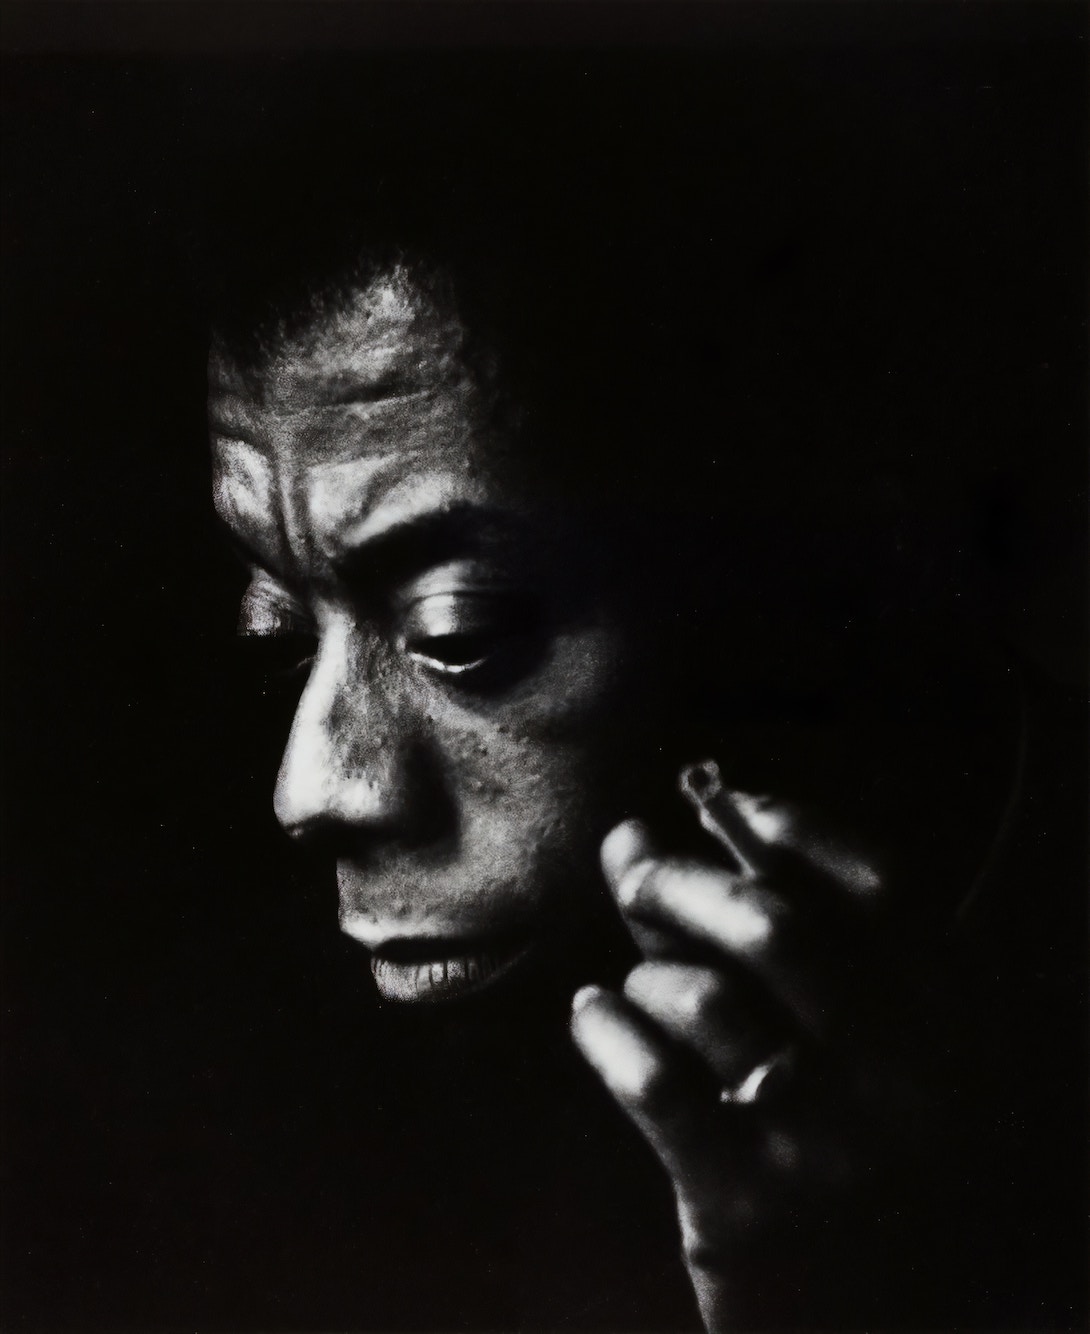 Read: https://www.europeana.eu/en/blog/audre-lorde-james-baldwin-and-astrid-roemer. Title: The author James Baldwin during a visit to the Netherlands. Date: 1965. Institution: Jewish Historical Museum. Provider: Judaica Europeana/Jewish Heritage Network. Providing country: Netherlands. Public Domain.